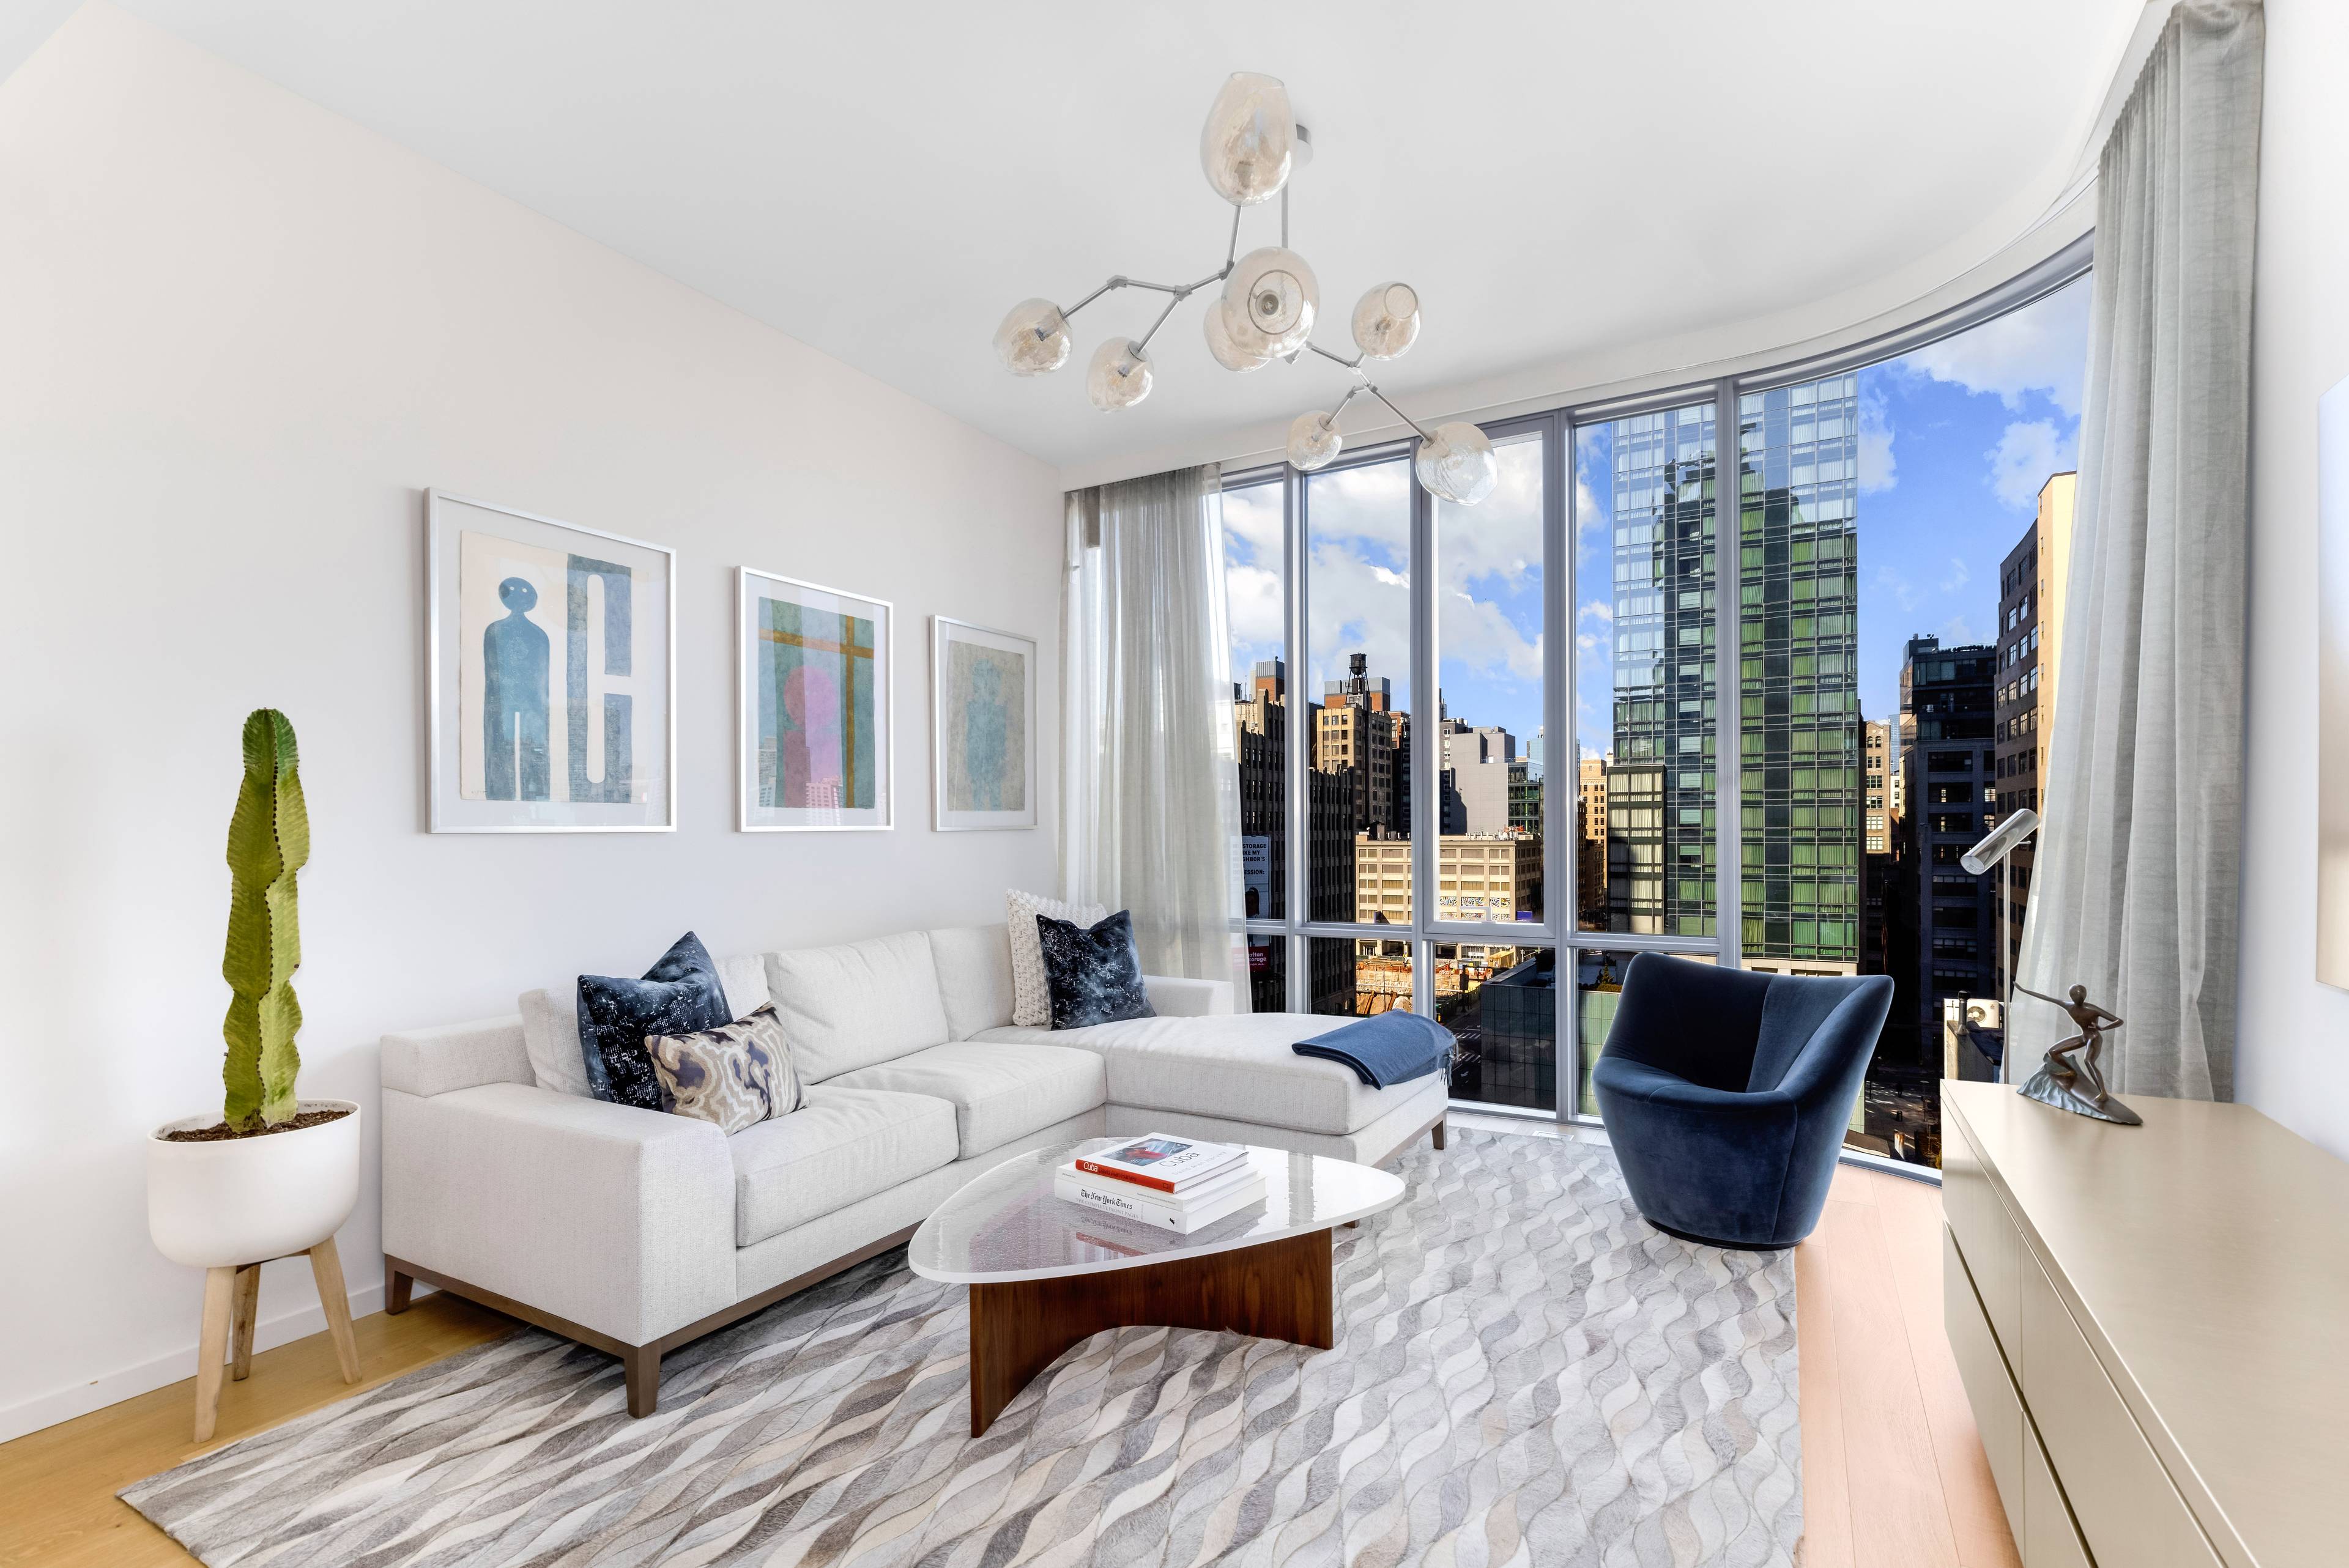 Dare to Dream ! Truly a home to envy, this high floor, 915 square foot 1 bedroom, 1.